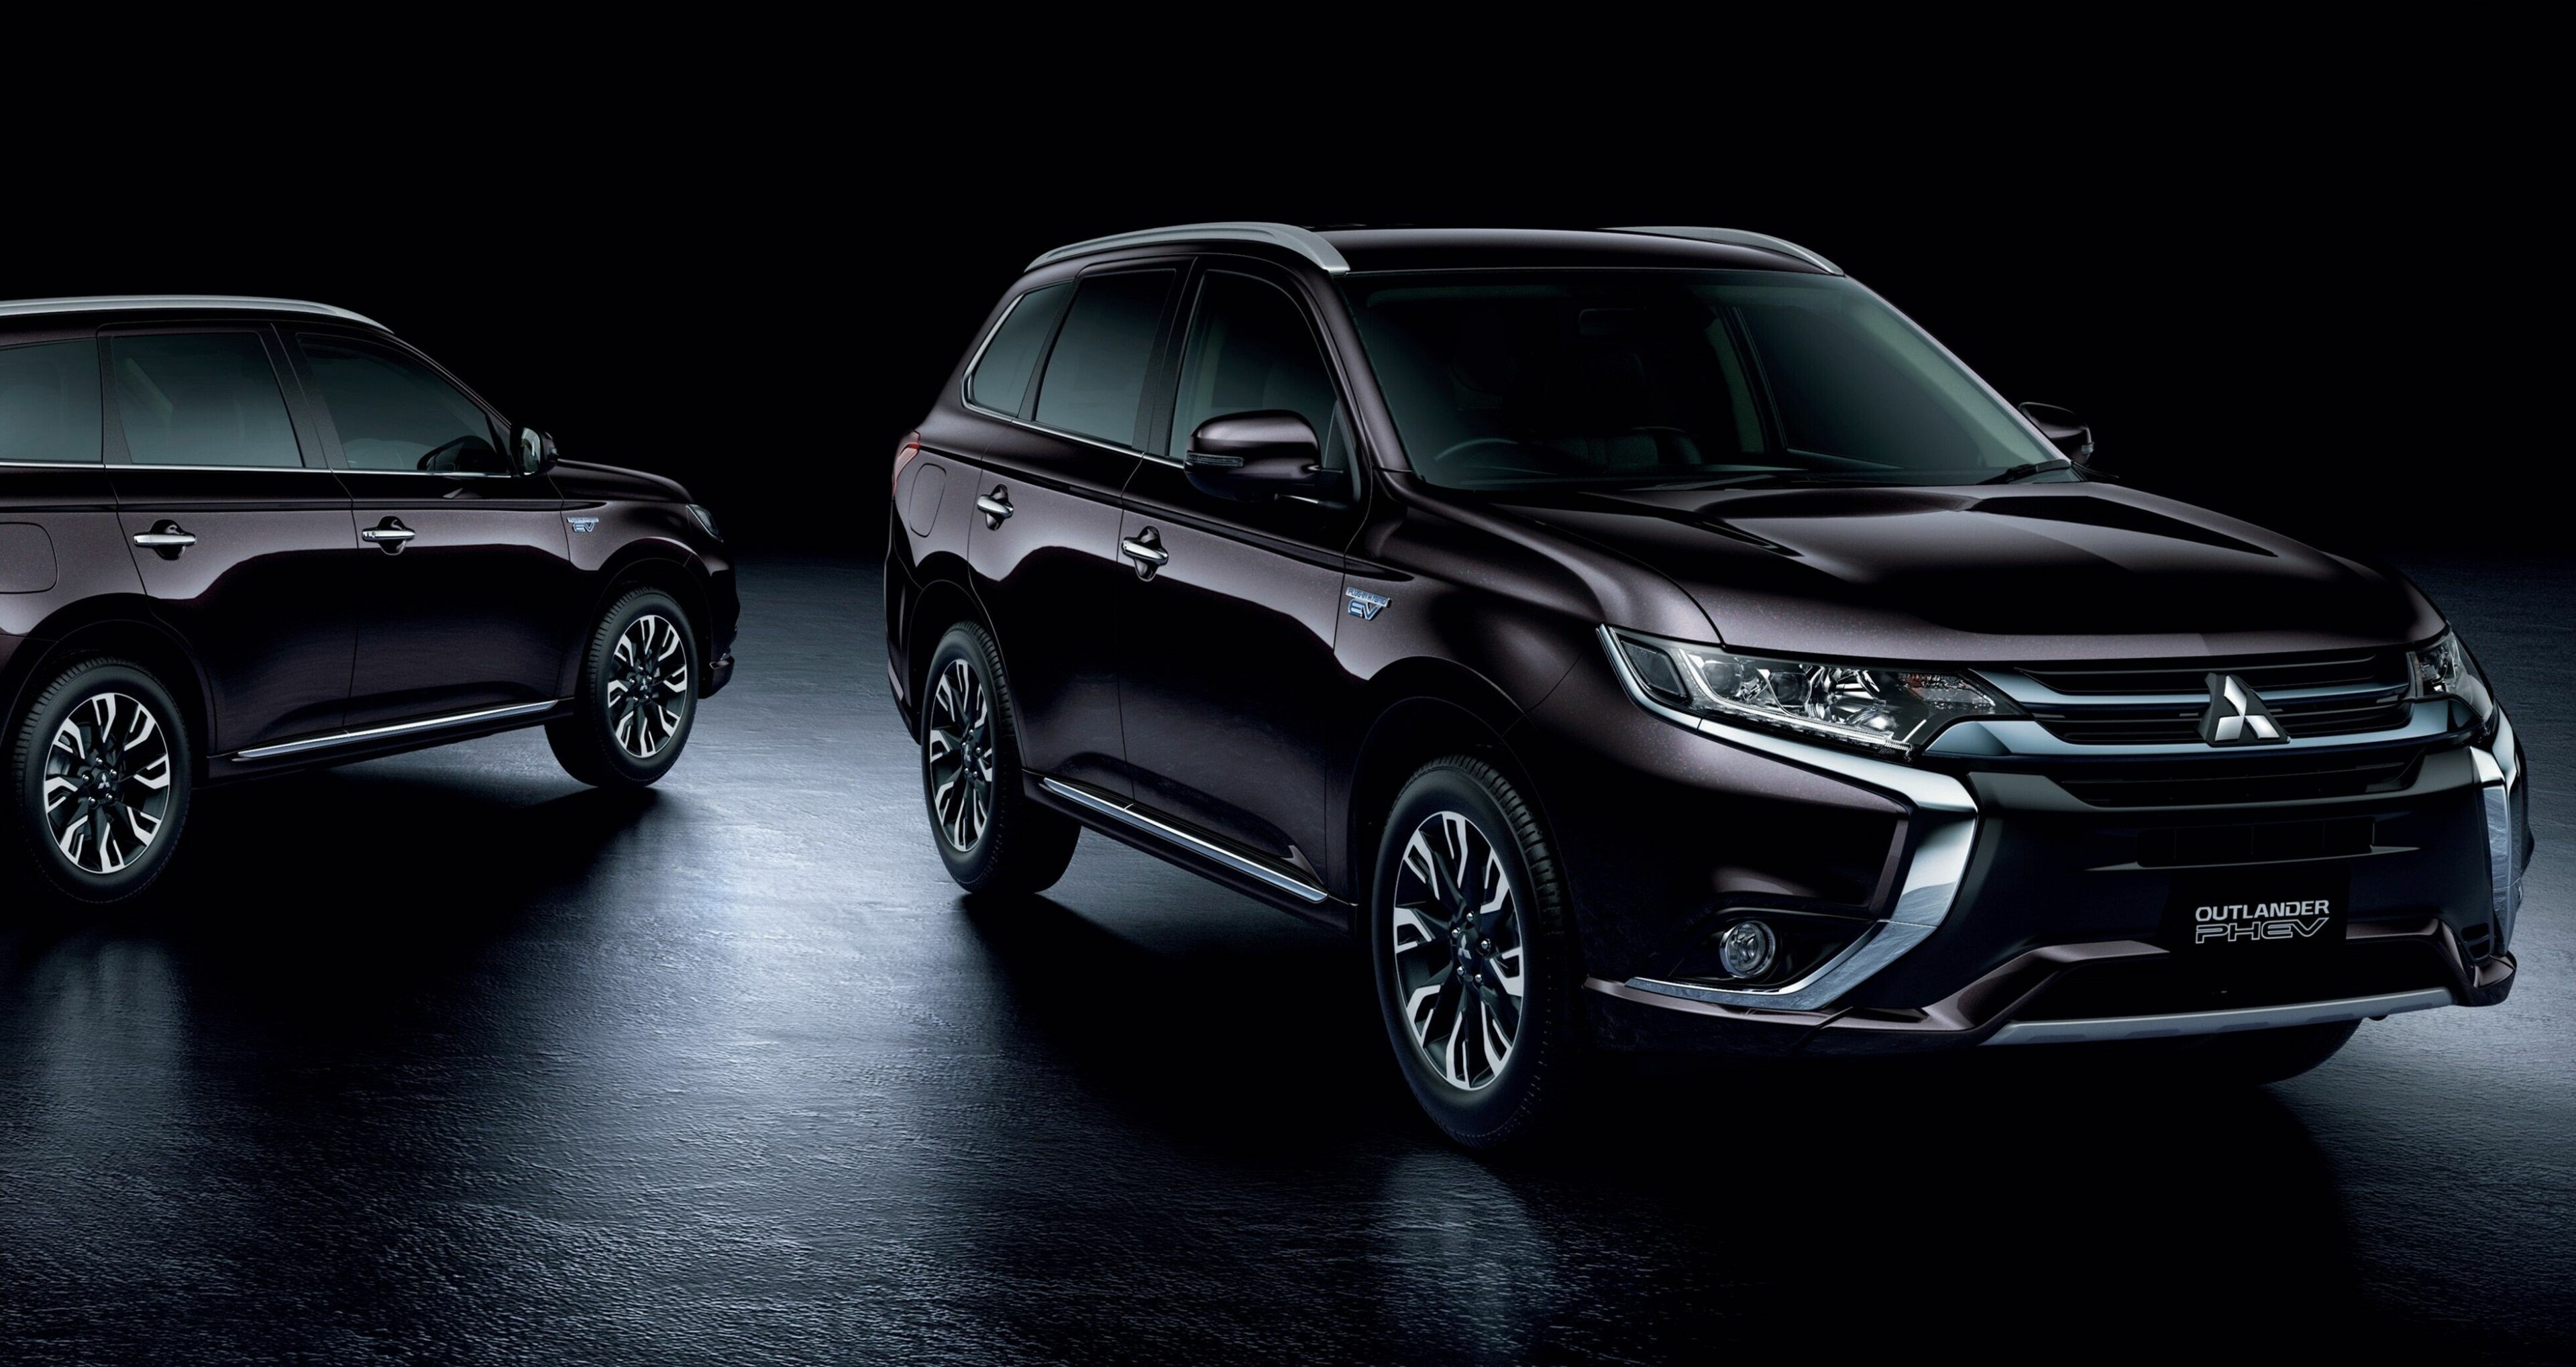 Mitsubishi: Outlander, A compact crossover SUV manufactured by Japanese automaker, MM. 3840x2040 HD Wallpaper.